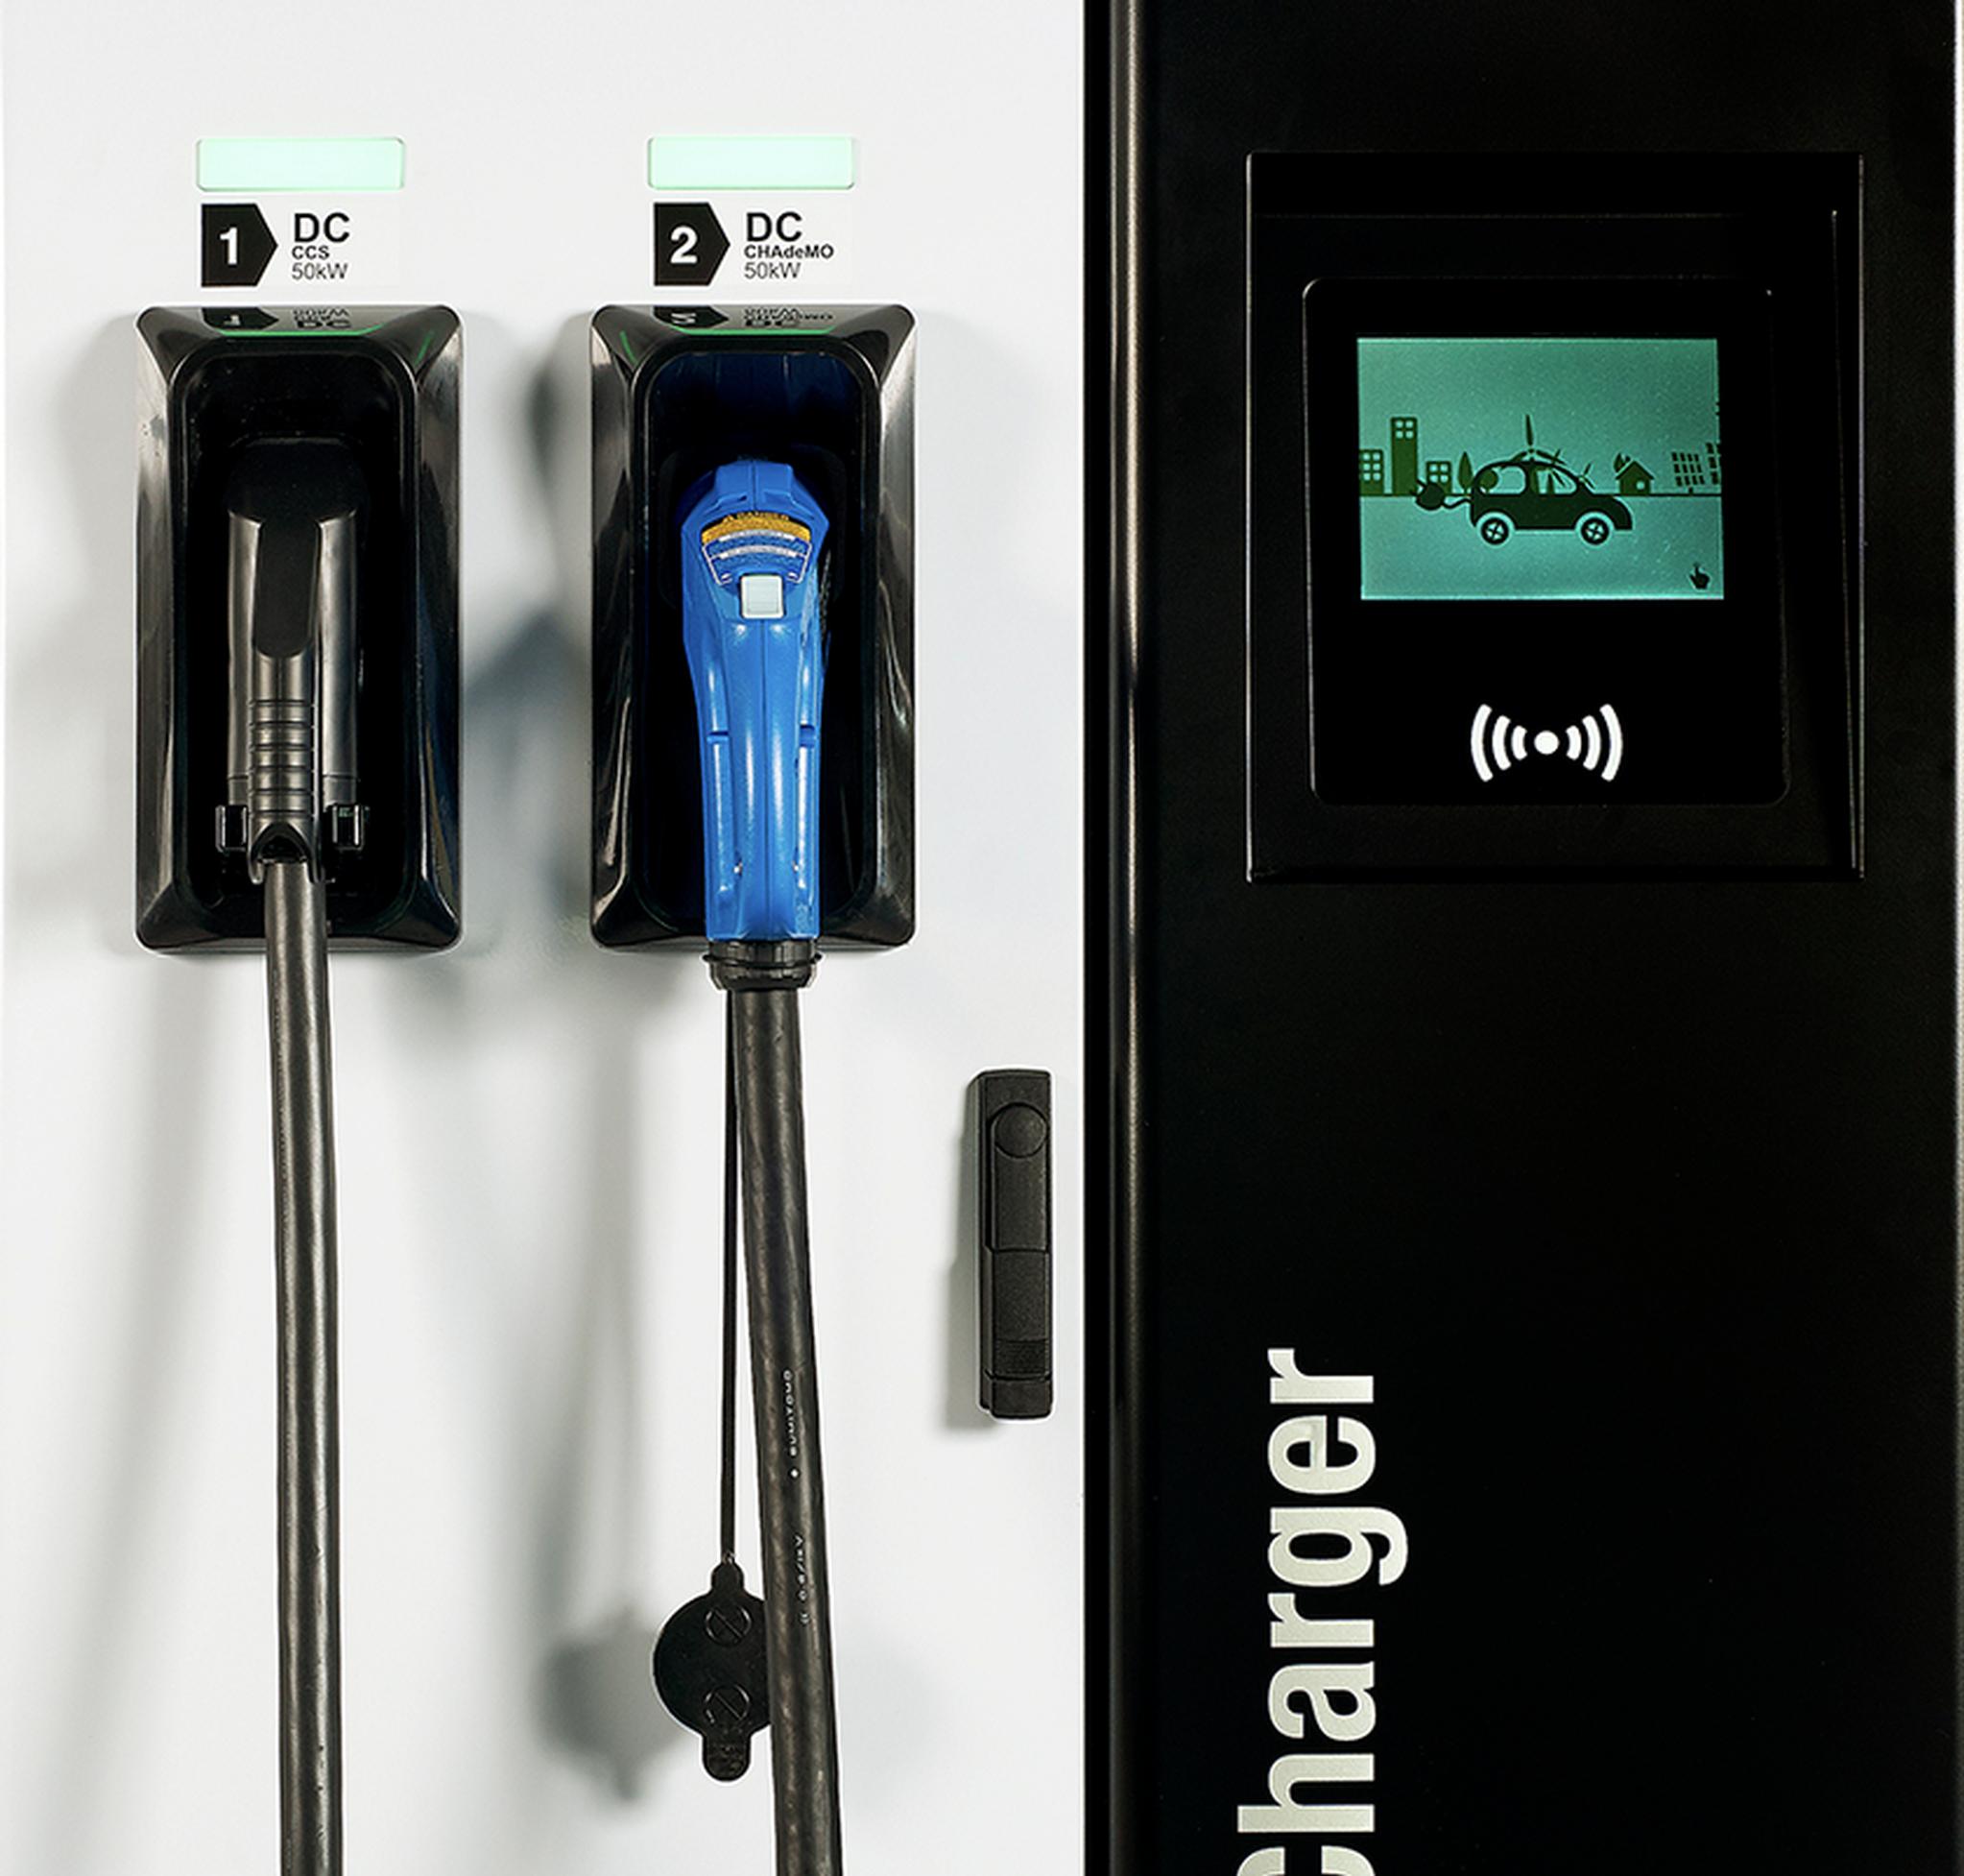 A Zytronic touchscreen on an EV chargepoint